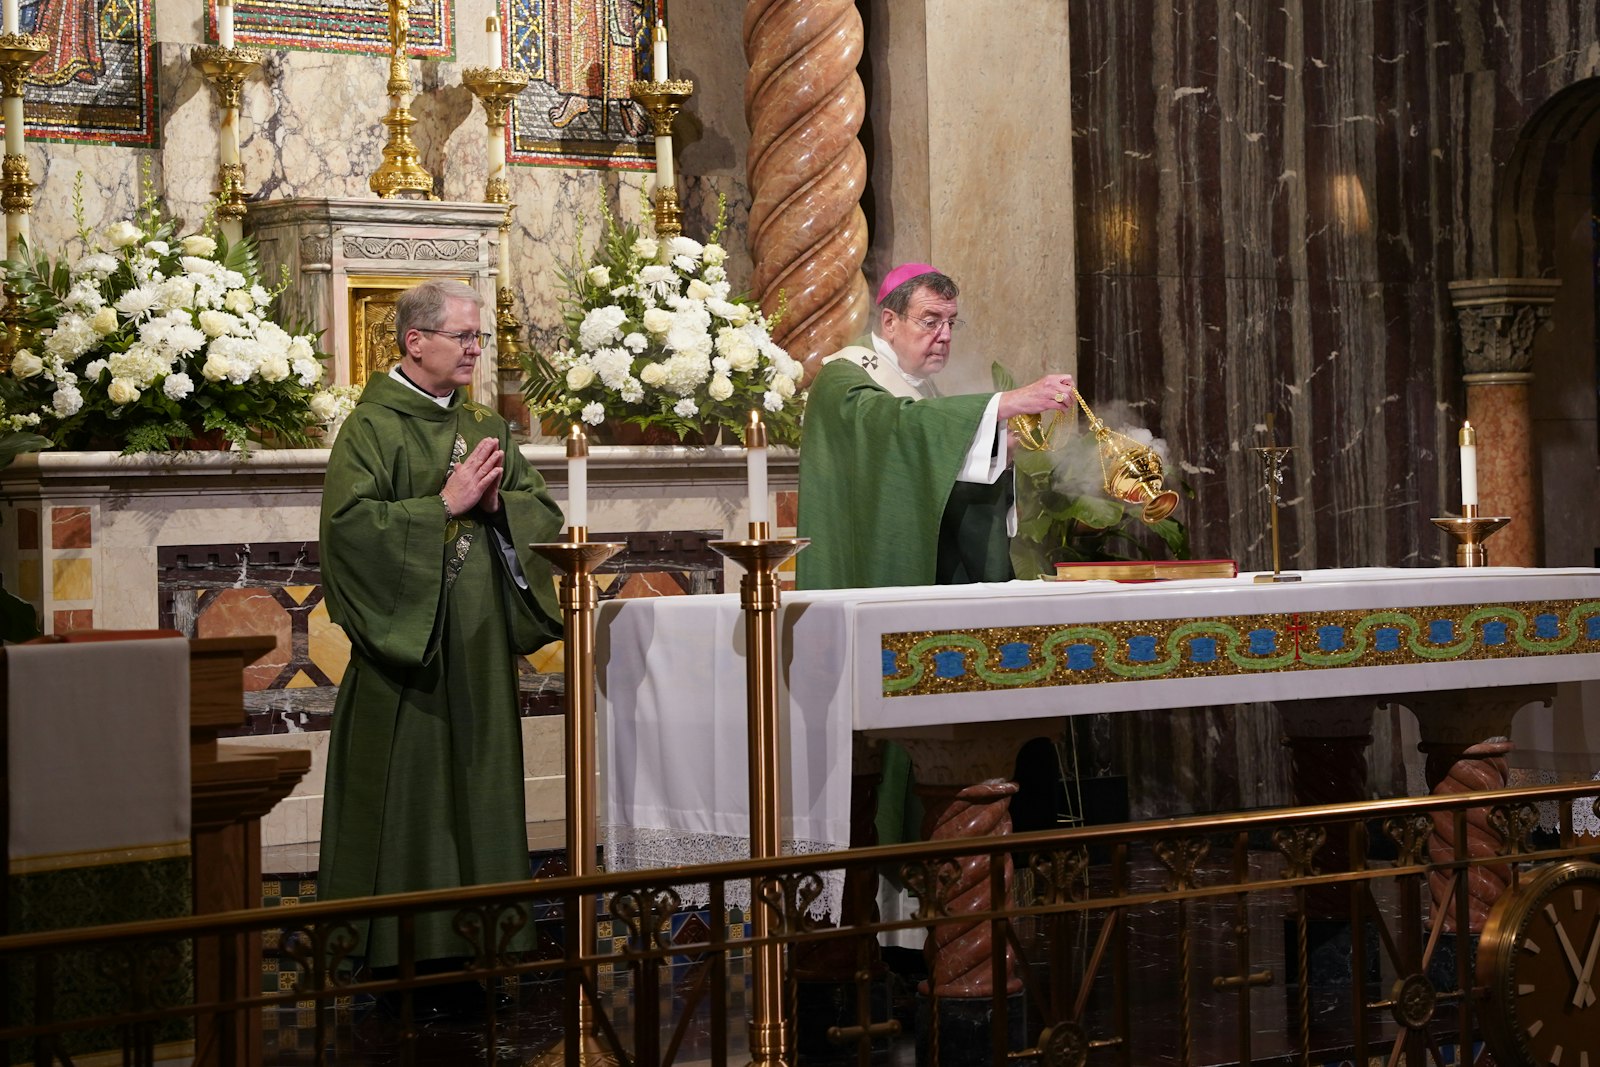 Archbishop Allen H. Vigneron of Detroit incenses the altar at the beginning of the 150th anniversary Mass at St. Aloysius Parish in Detroit. Archbishop Vigneron referred to the church as his “second home,” since its parish boundaries include the Chancery.